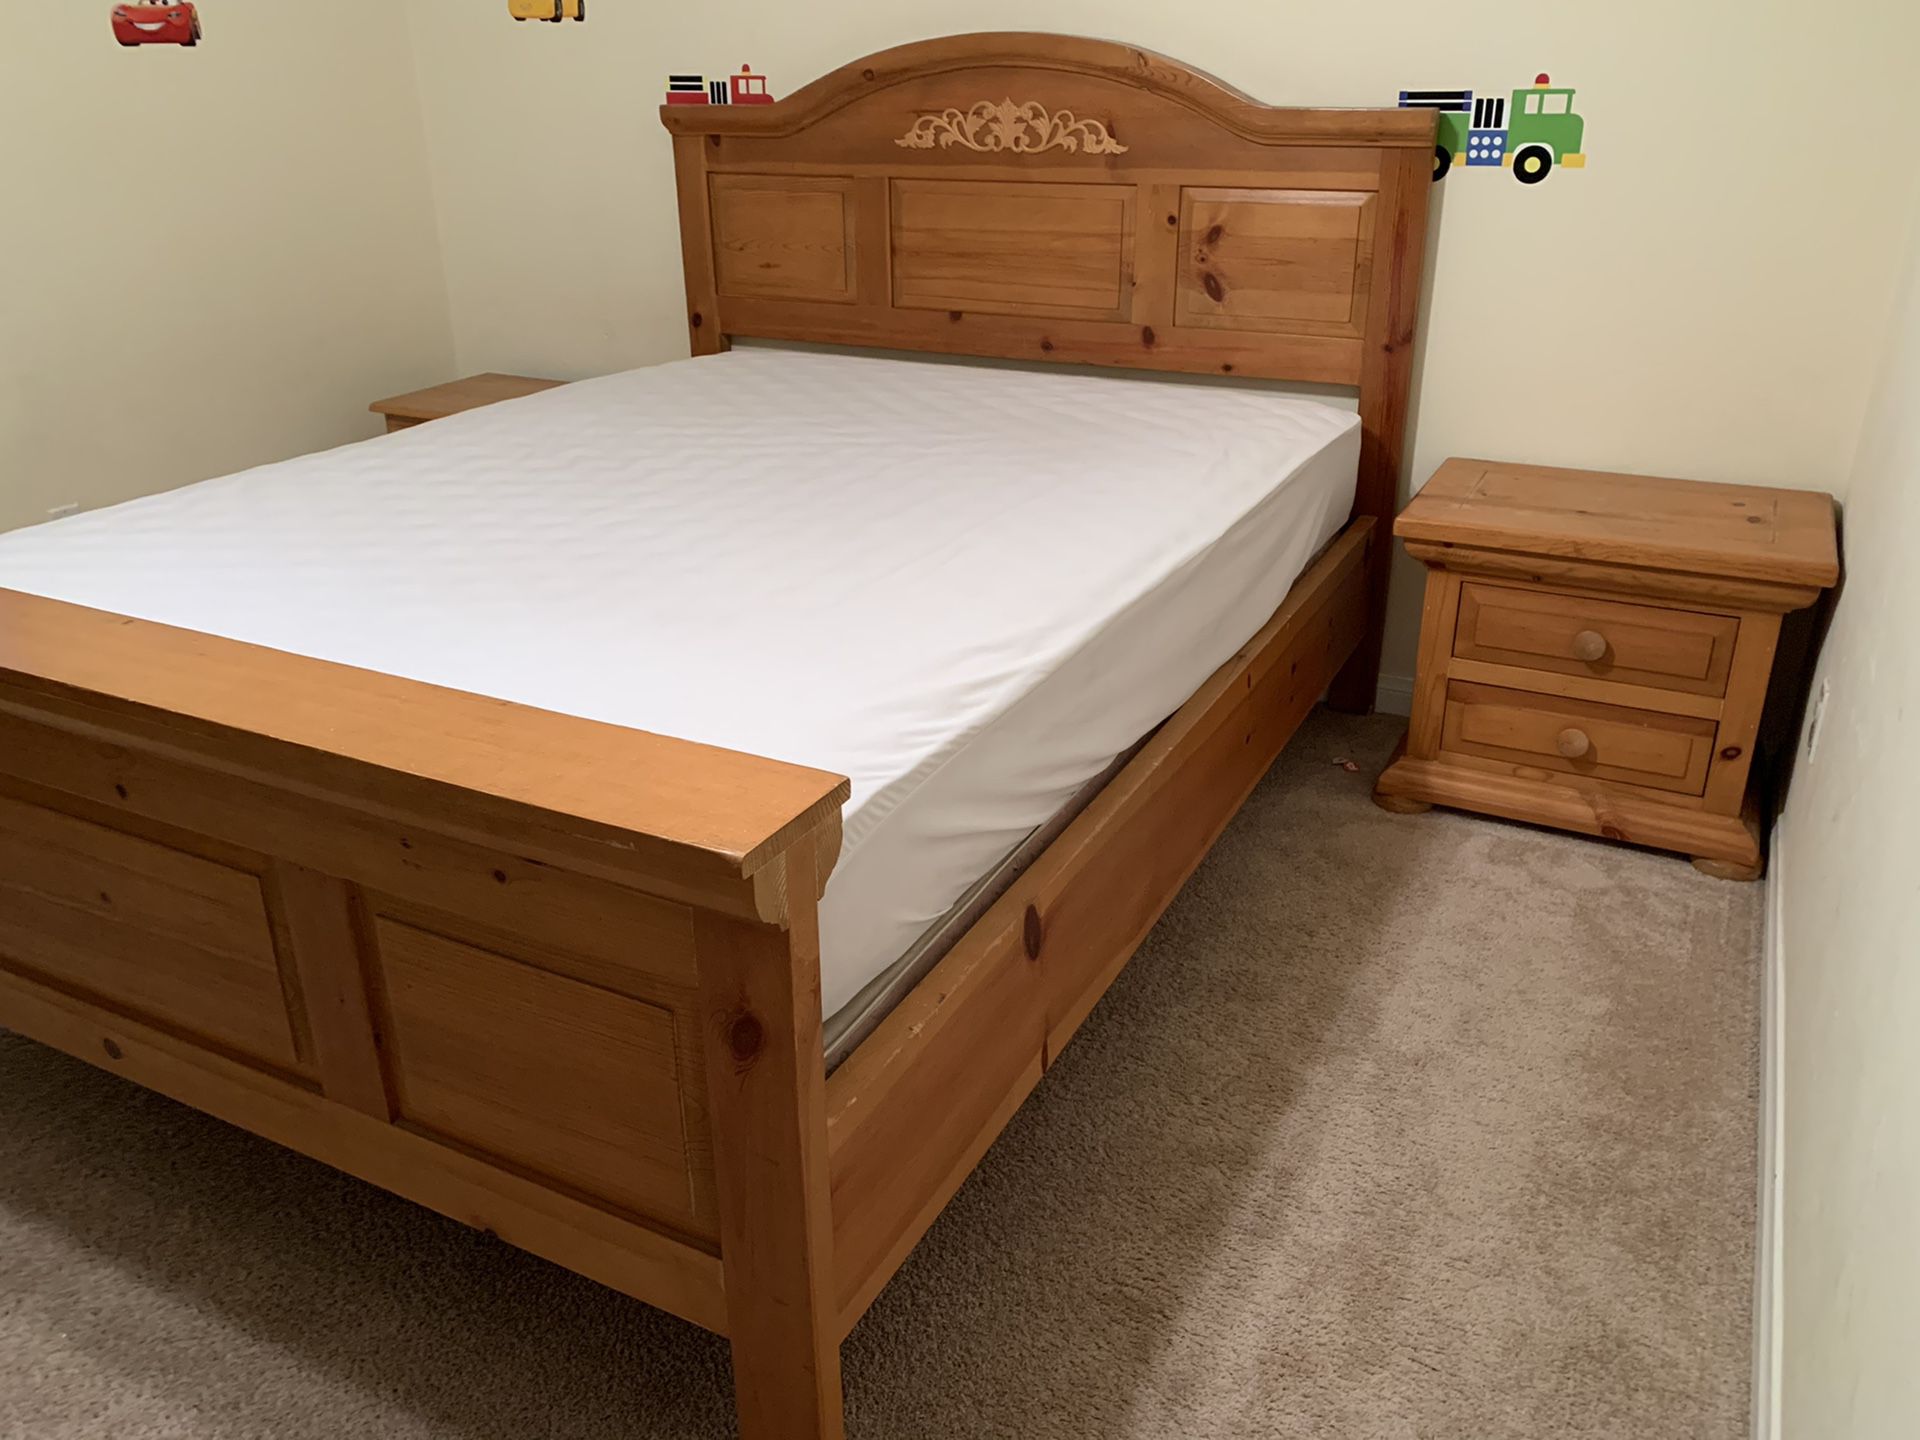 Queen size bed frame, night stand, mattress and box spring